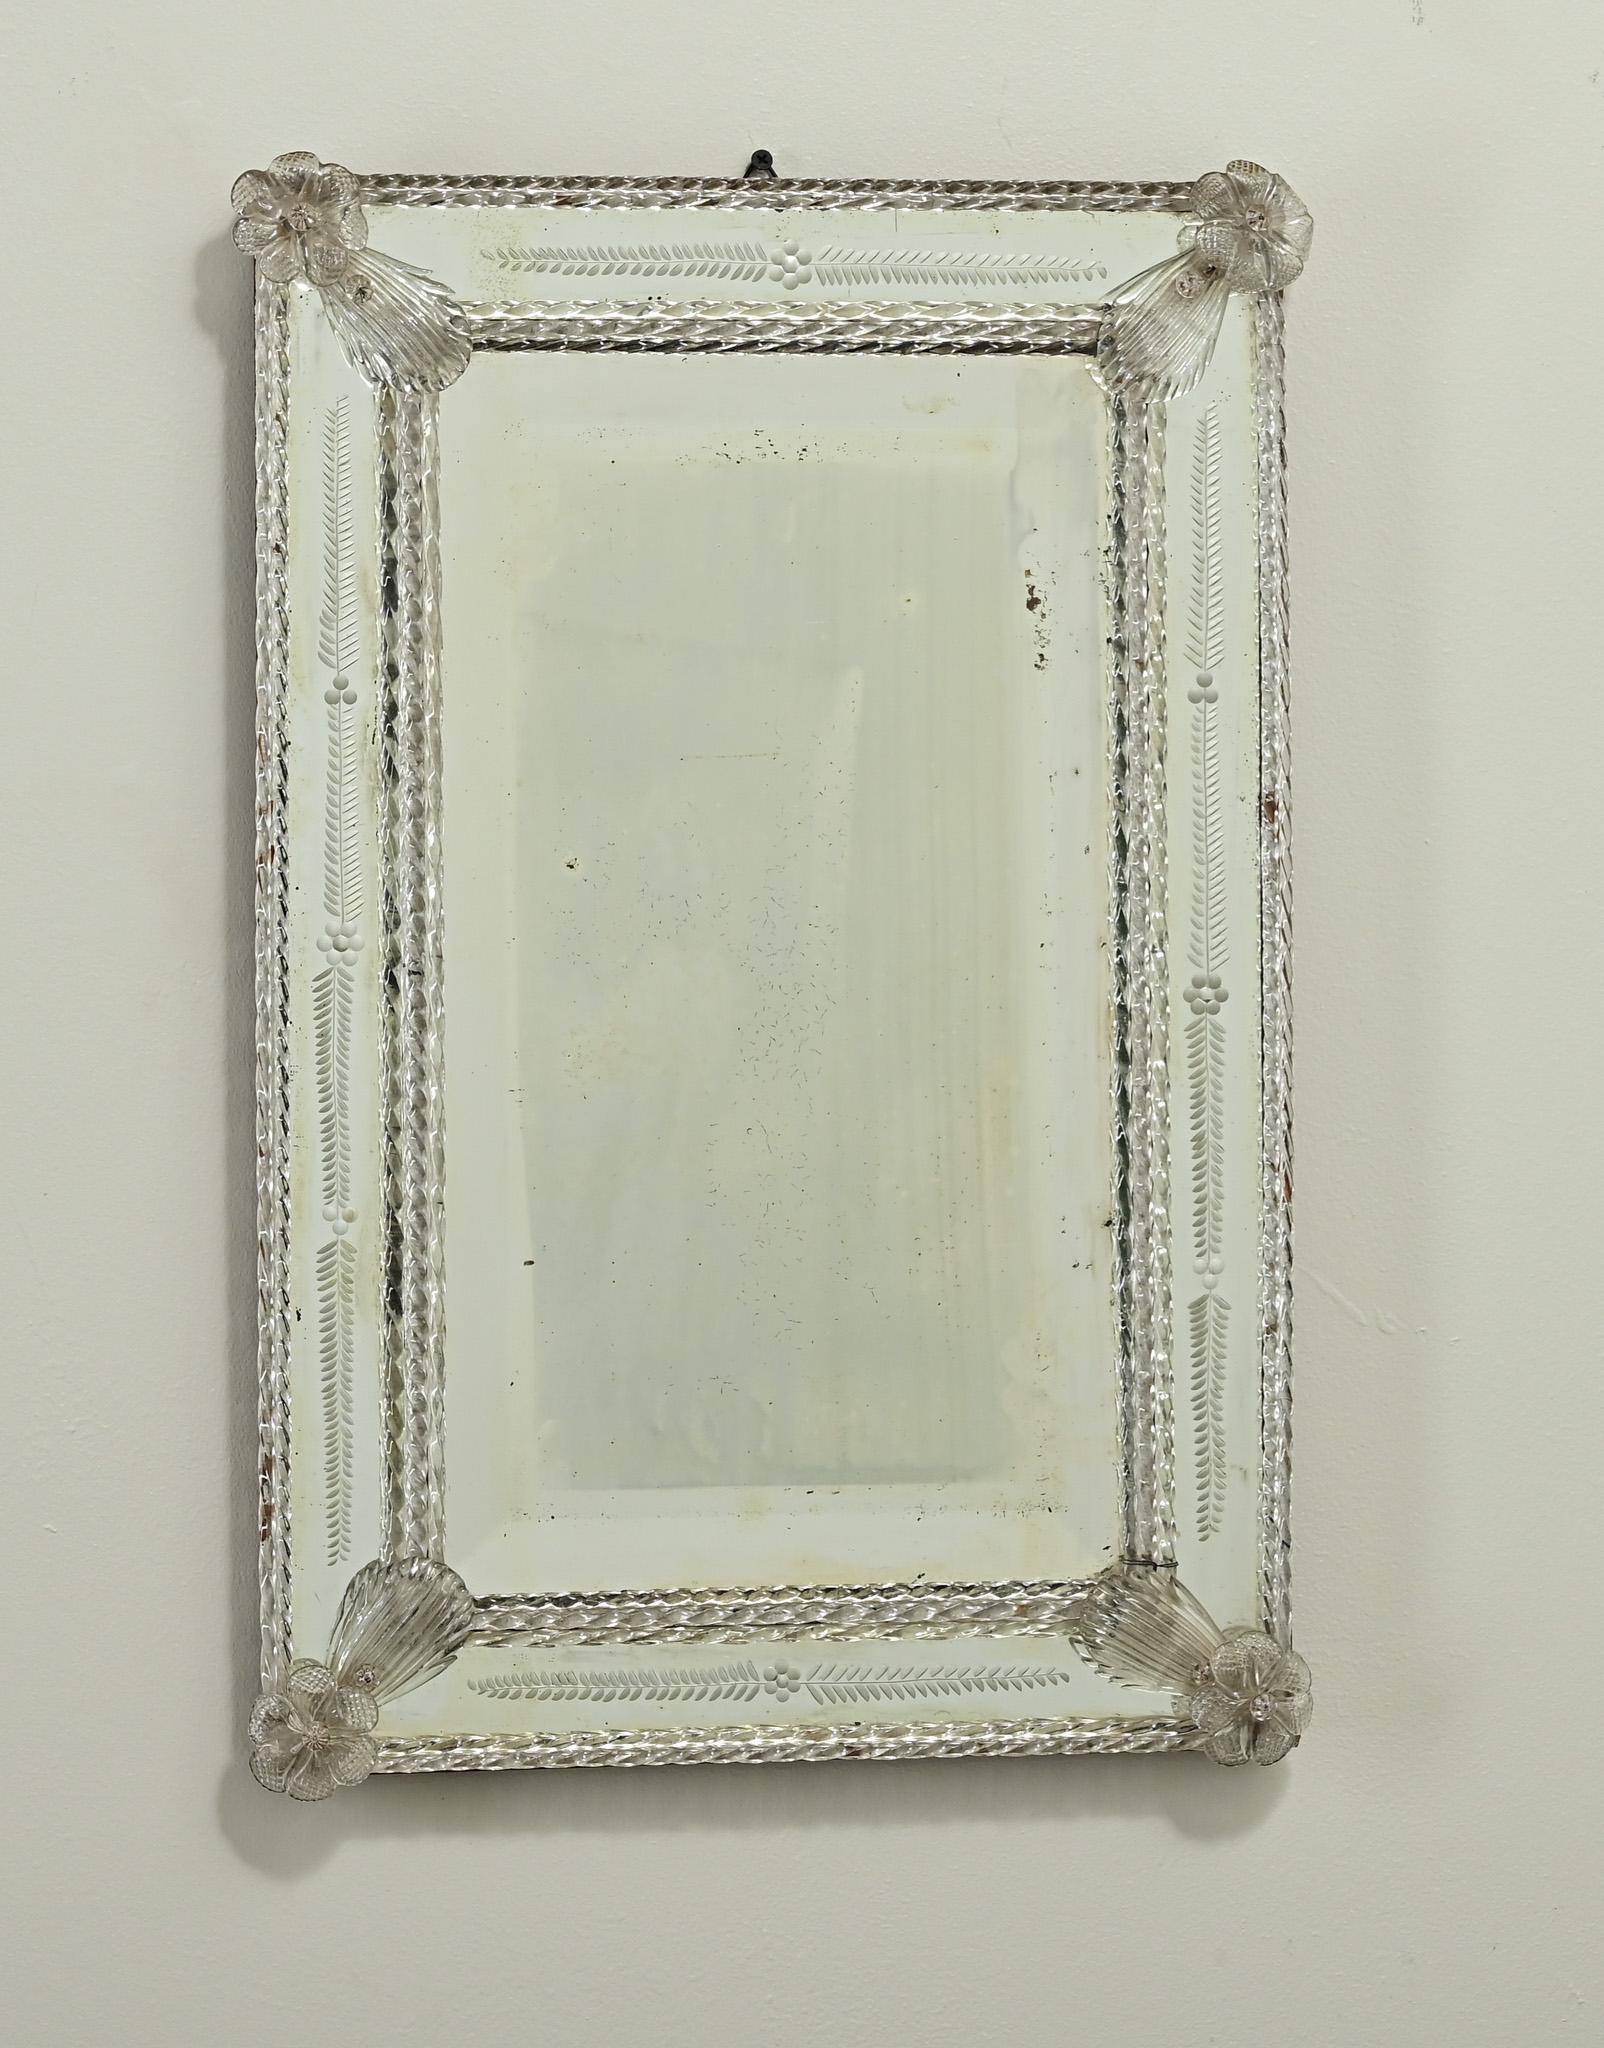 The frame of this unique Venetian mirror from Murano, Italy has beautiful floral etchings and hand blown glass appliqués. Inside the frame is the original hand cut beveled mirror plate with light foxing. Be sure to view the detailed images to get a